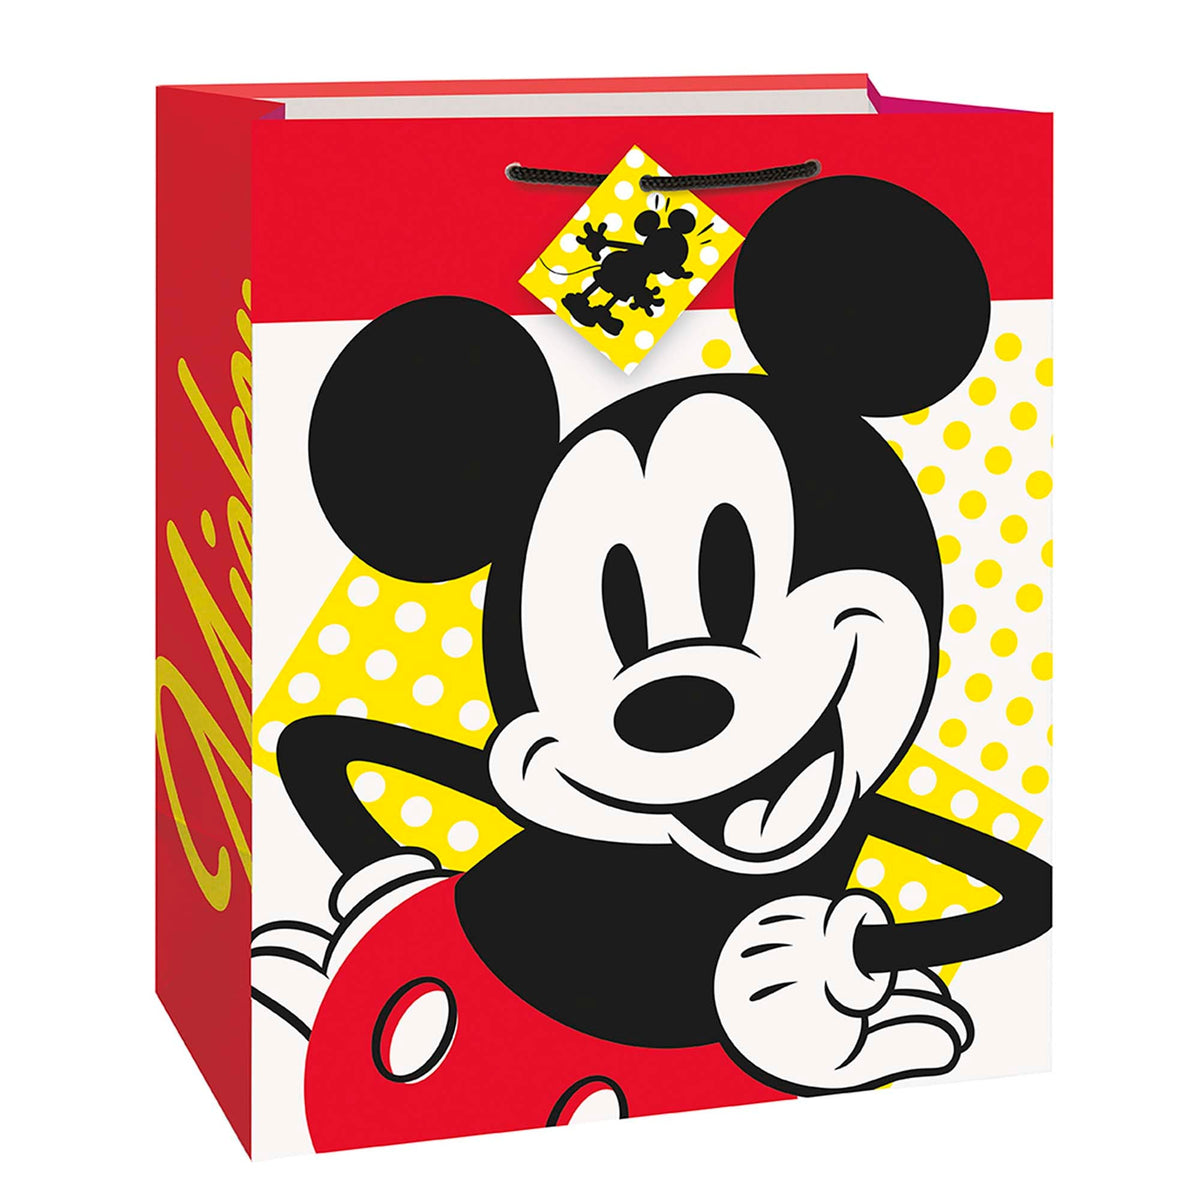 UNIQUE PARTY FAVORS Kids Birthday Mickey Roadster Racers large gift bag 011179234615